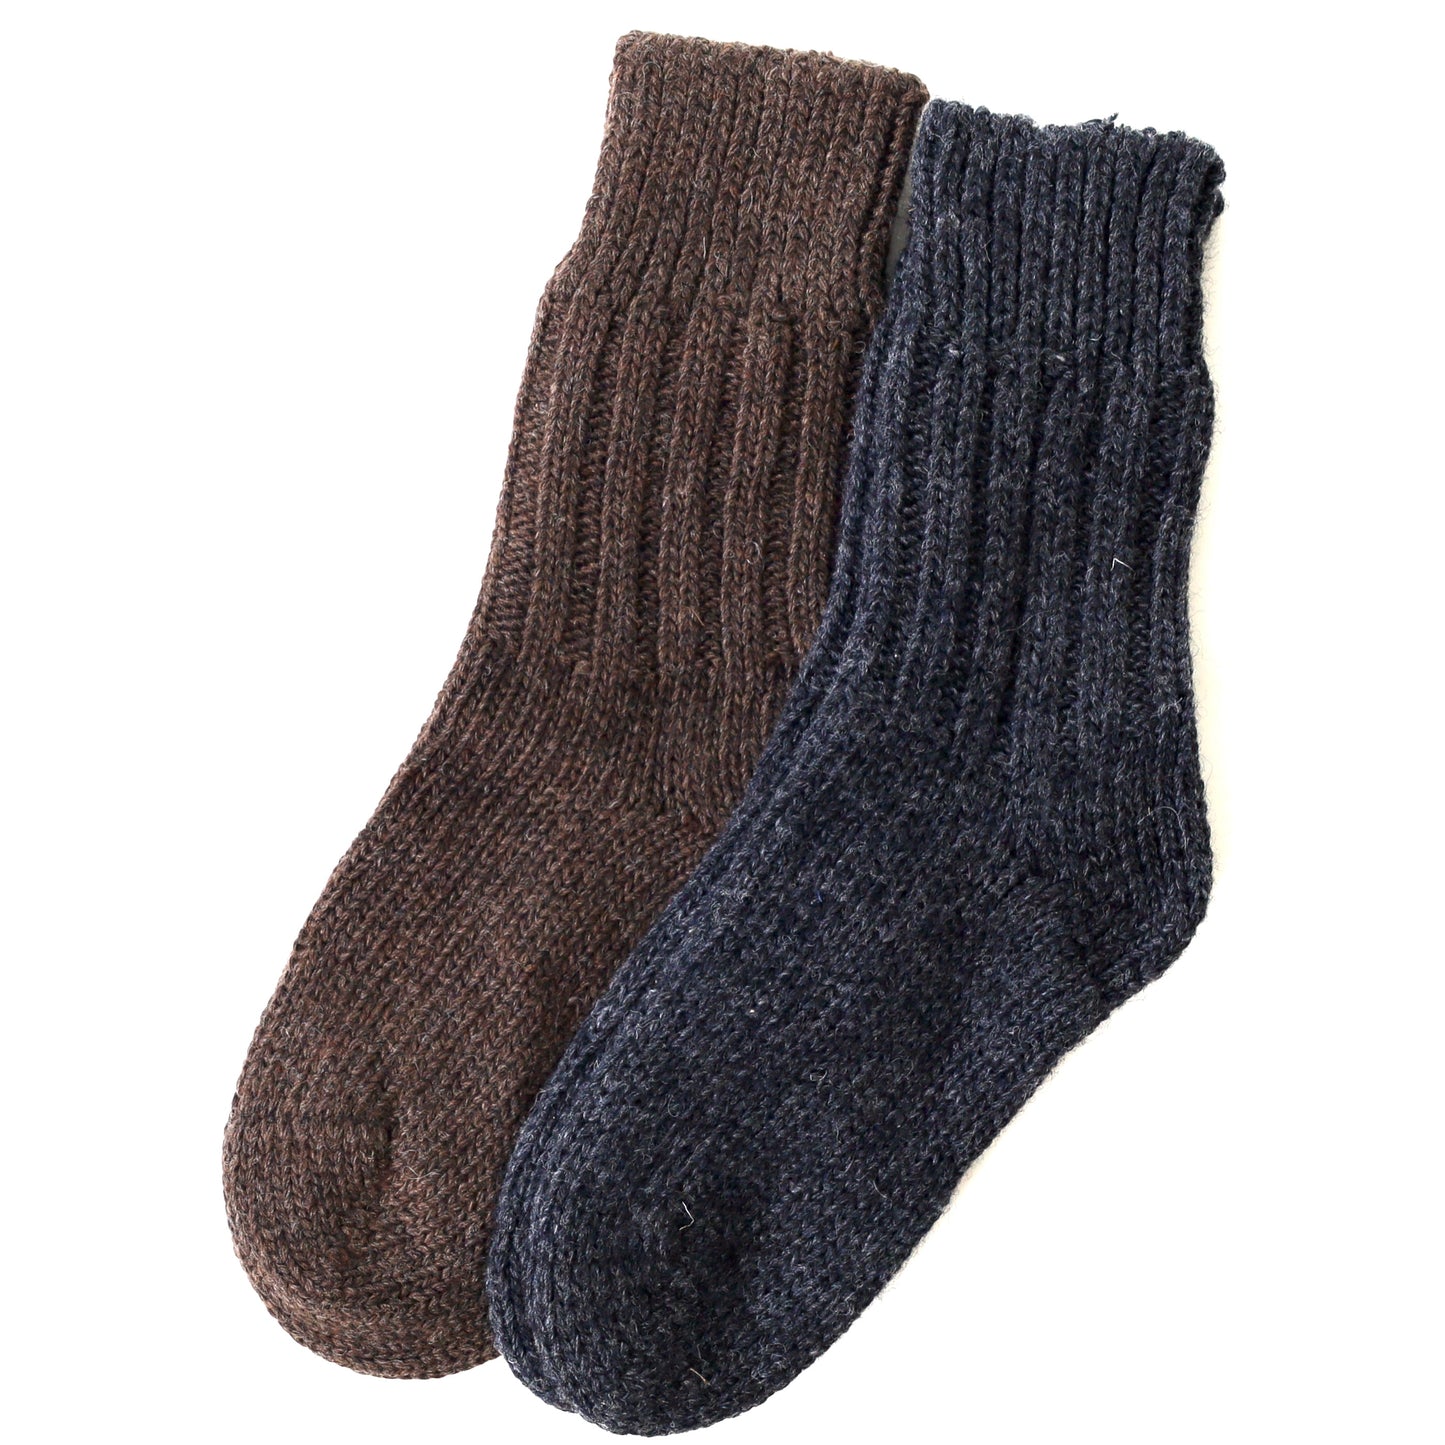 Hirsch Natur - 100% Organic Virgin Wool Socks with Grippers, Sizes 6-11.5  for Men and